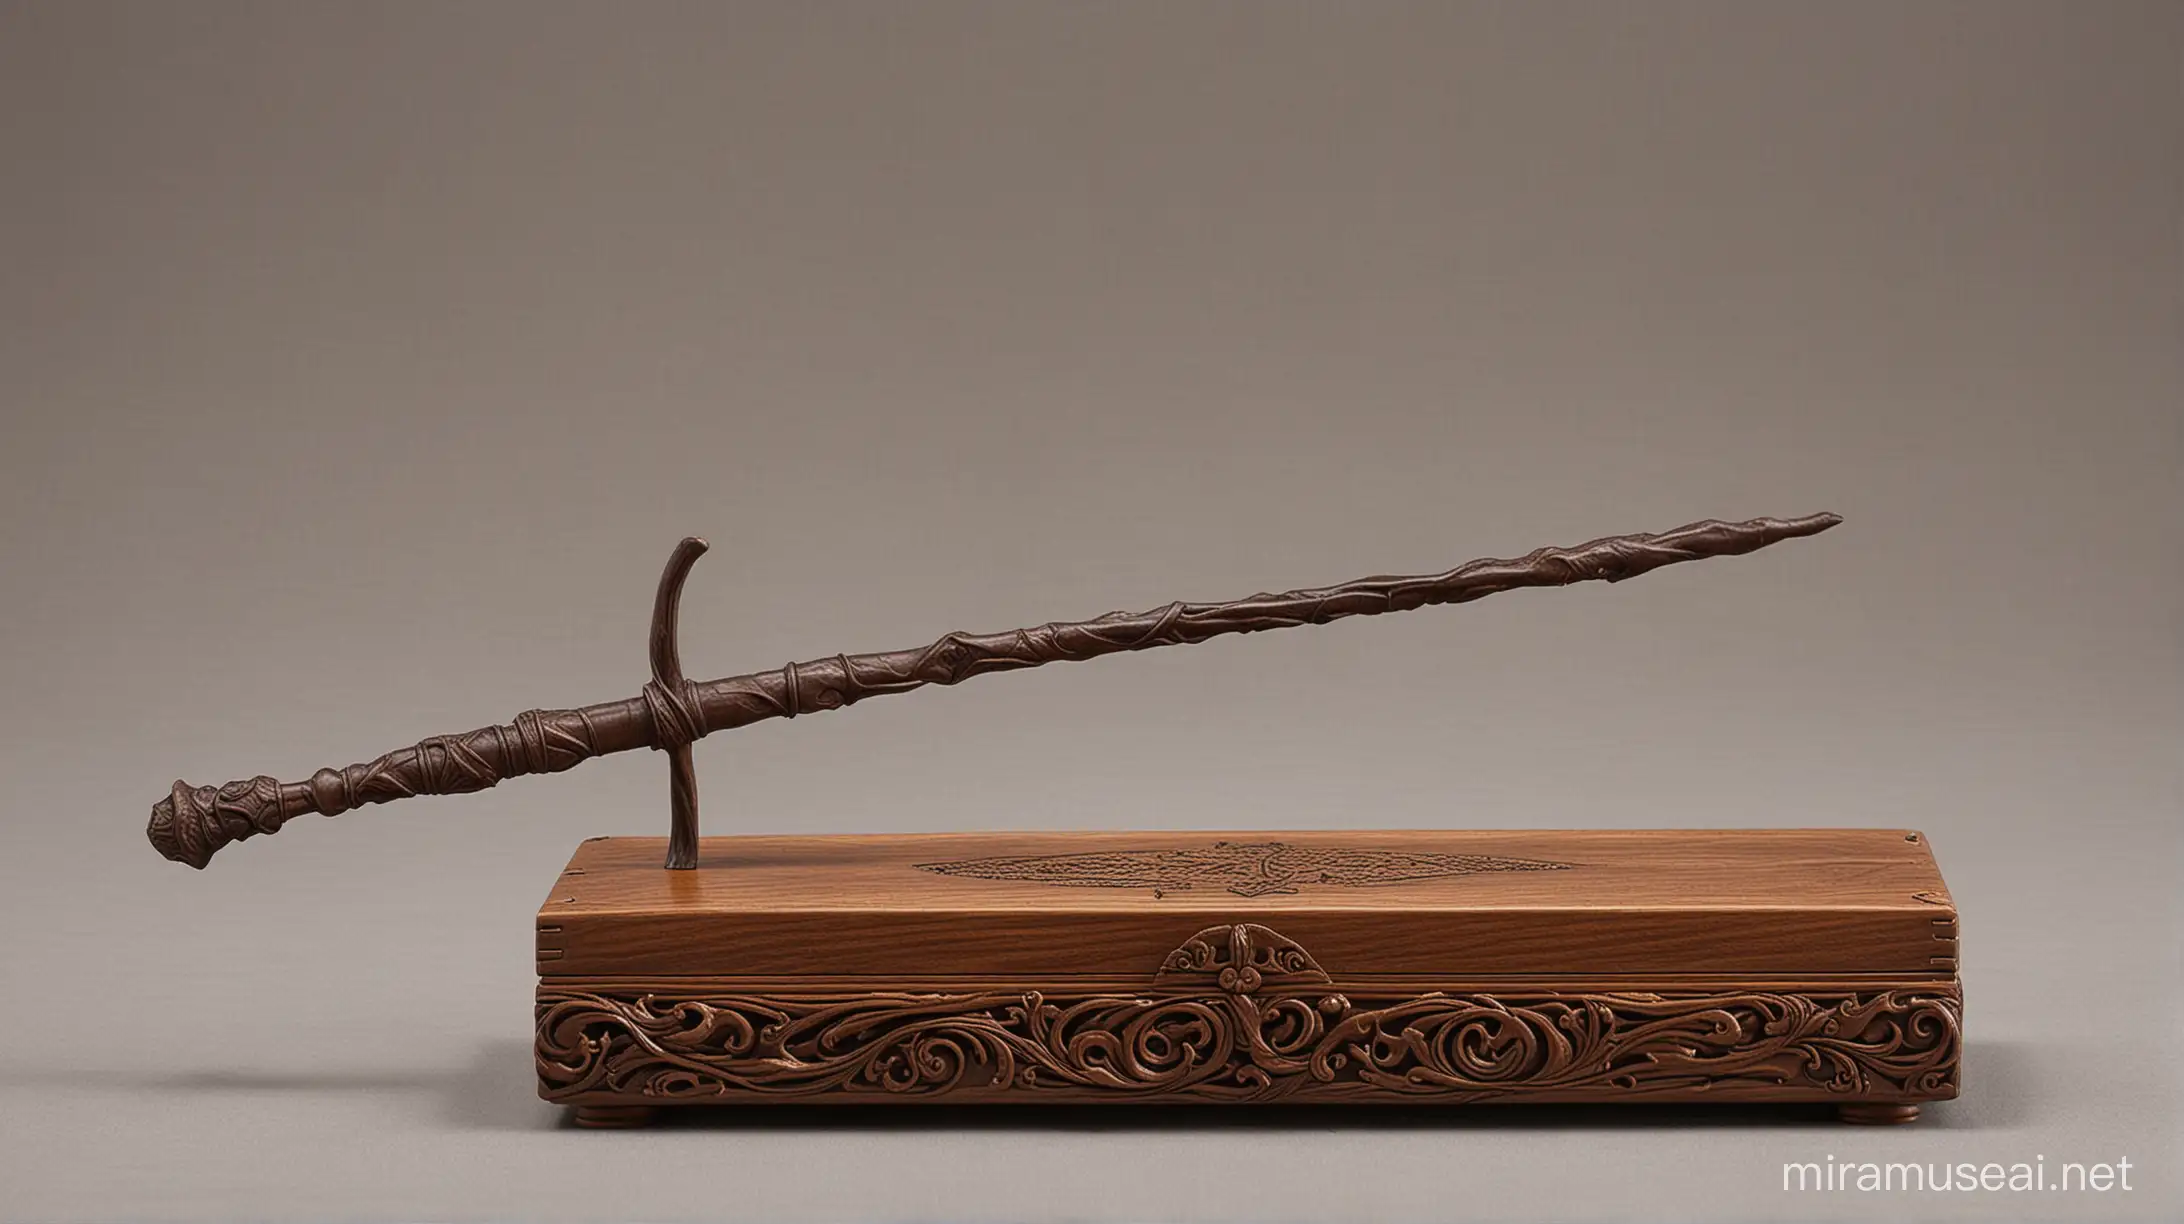 A wand in the style of those used in the Harry Potter movies. the wand is a  completely original design. Made from black walnut wood.  It is approximately 14 inches long. Very stylish and a little scary looking. Fine craftsmanship.  Displayed next to its Lovely wooden box and sitting upon a table with a felt tablecloth. Photorealistic 